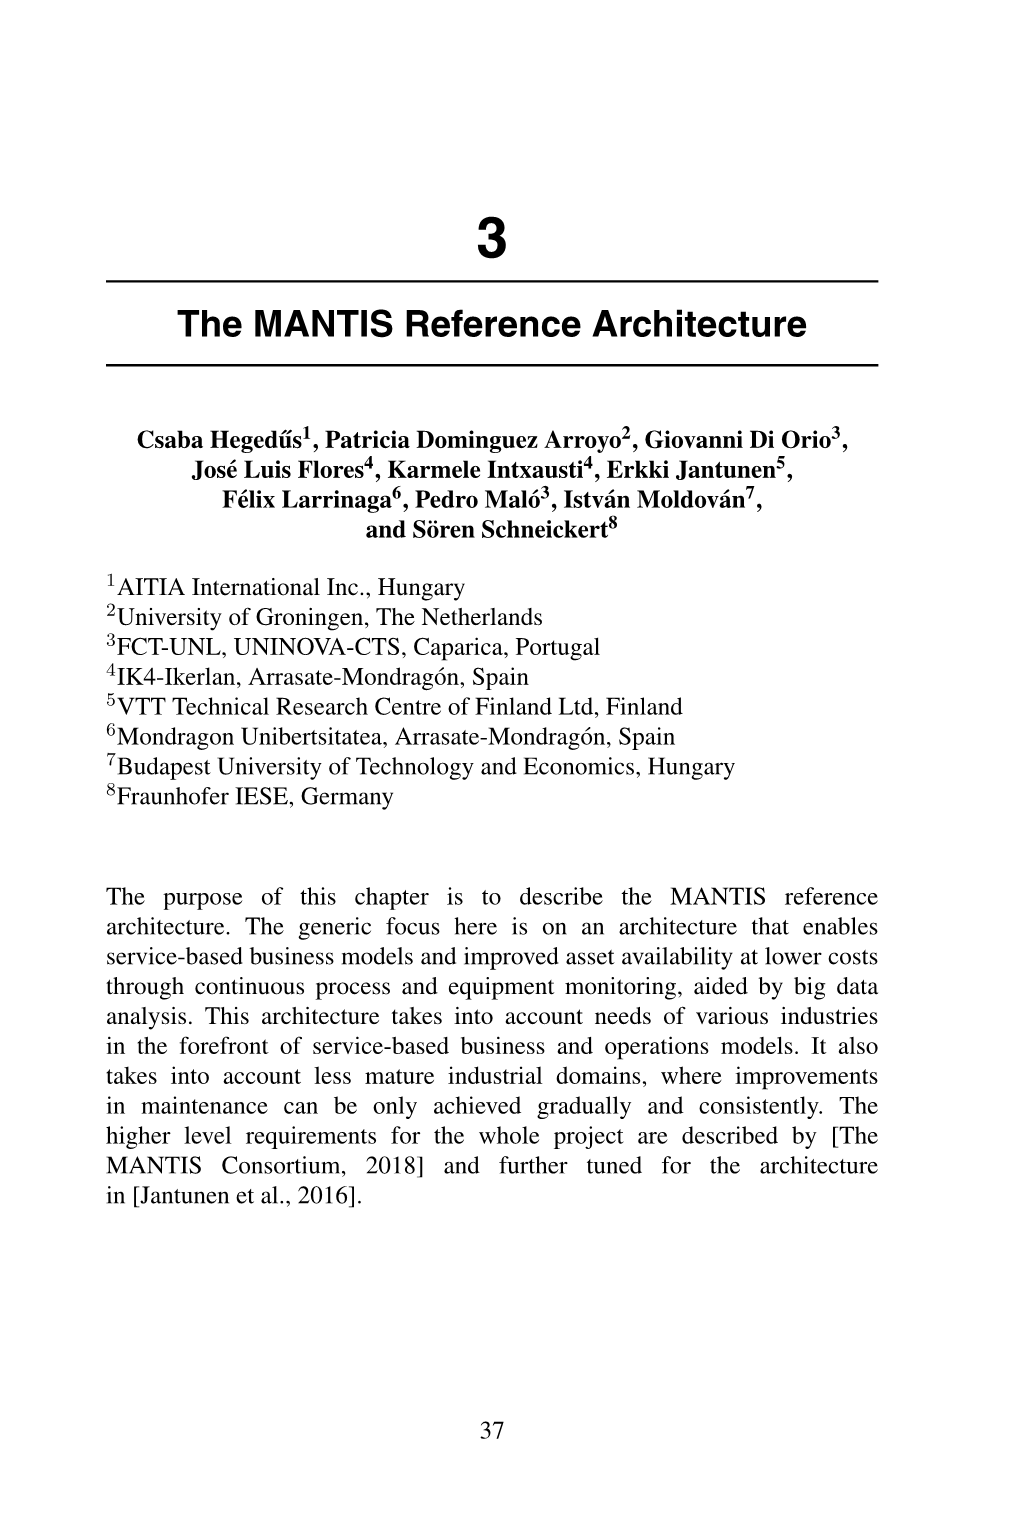 The MANTIS Reference Architecture